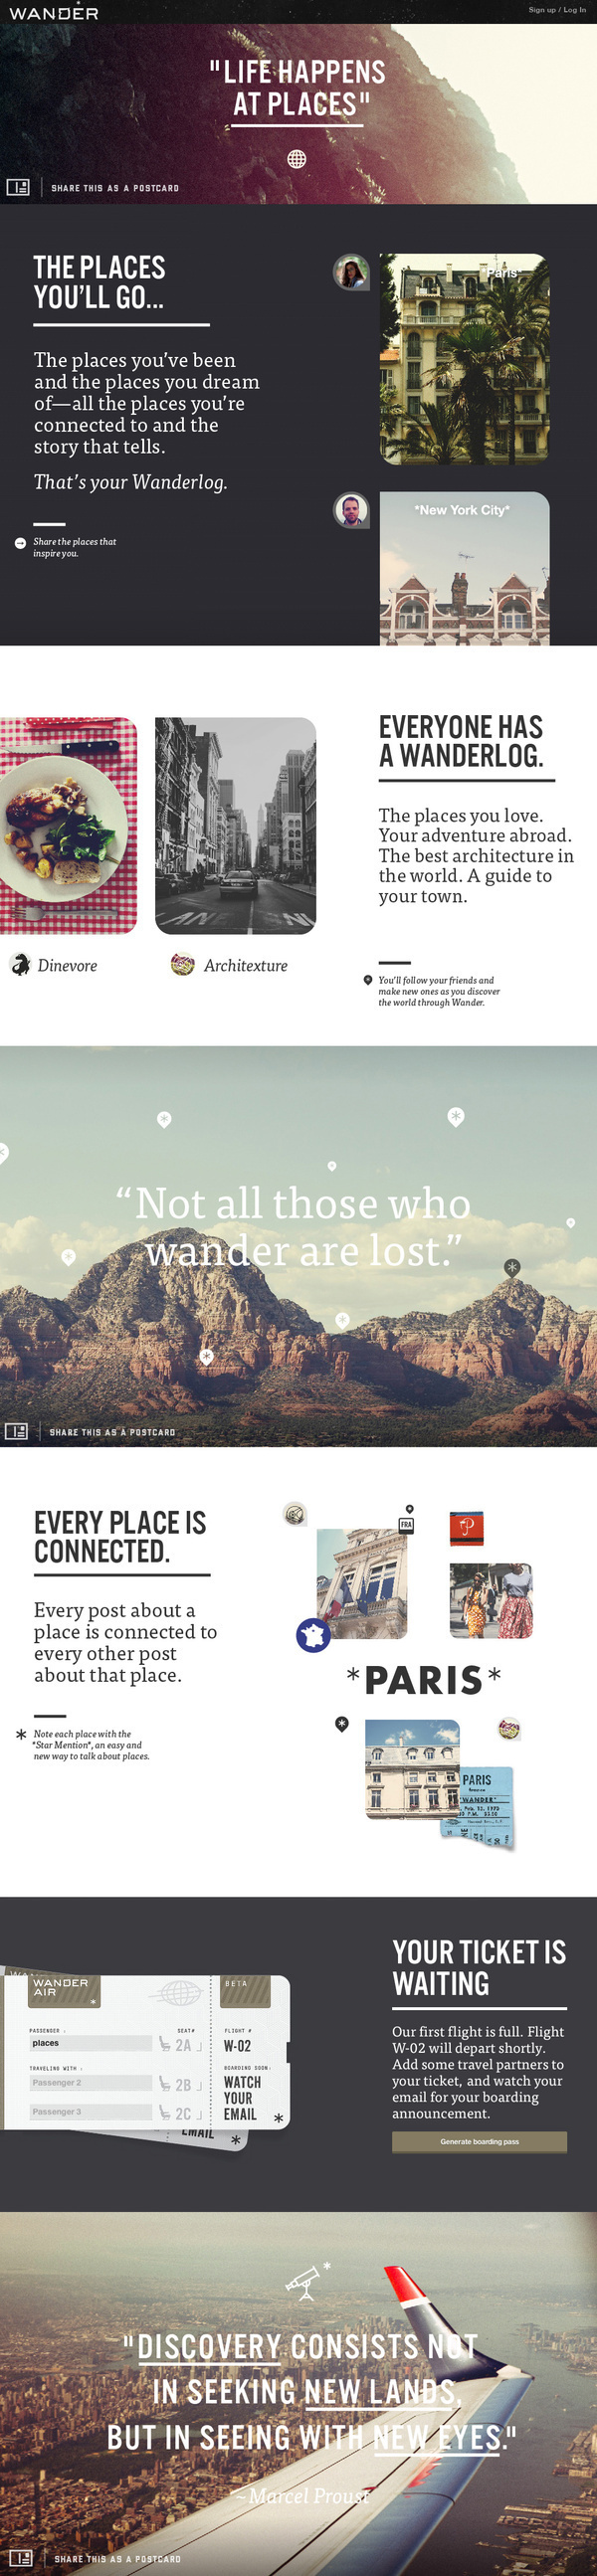 Wander Product Summary Page on Behance #website #travel